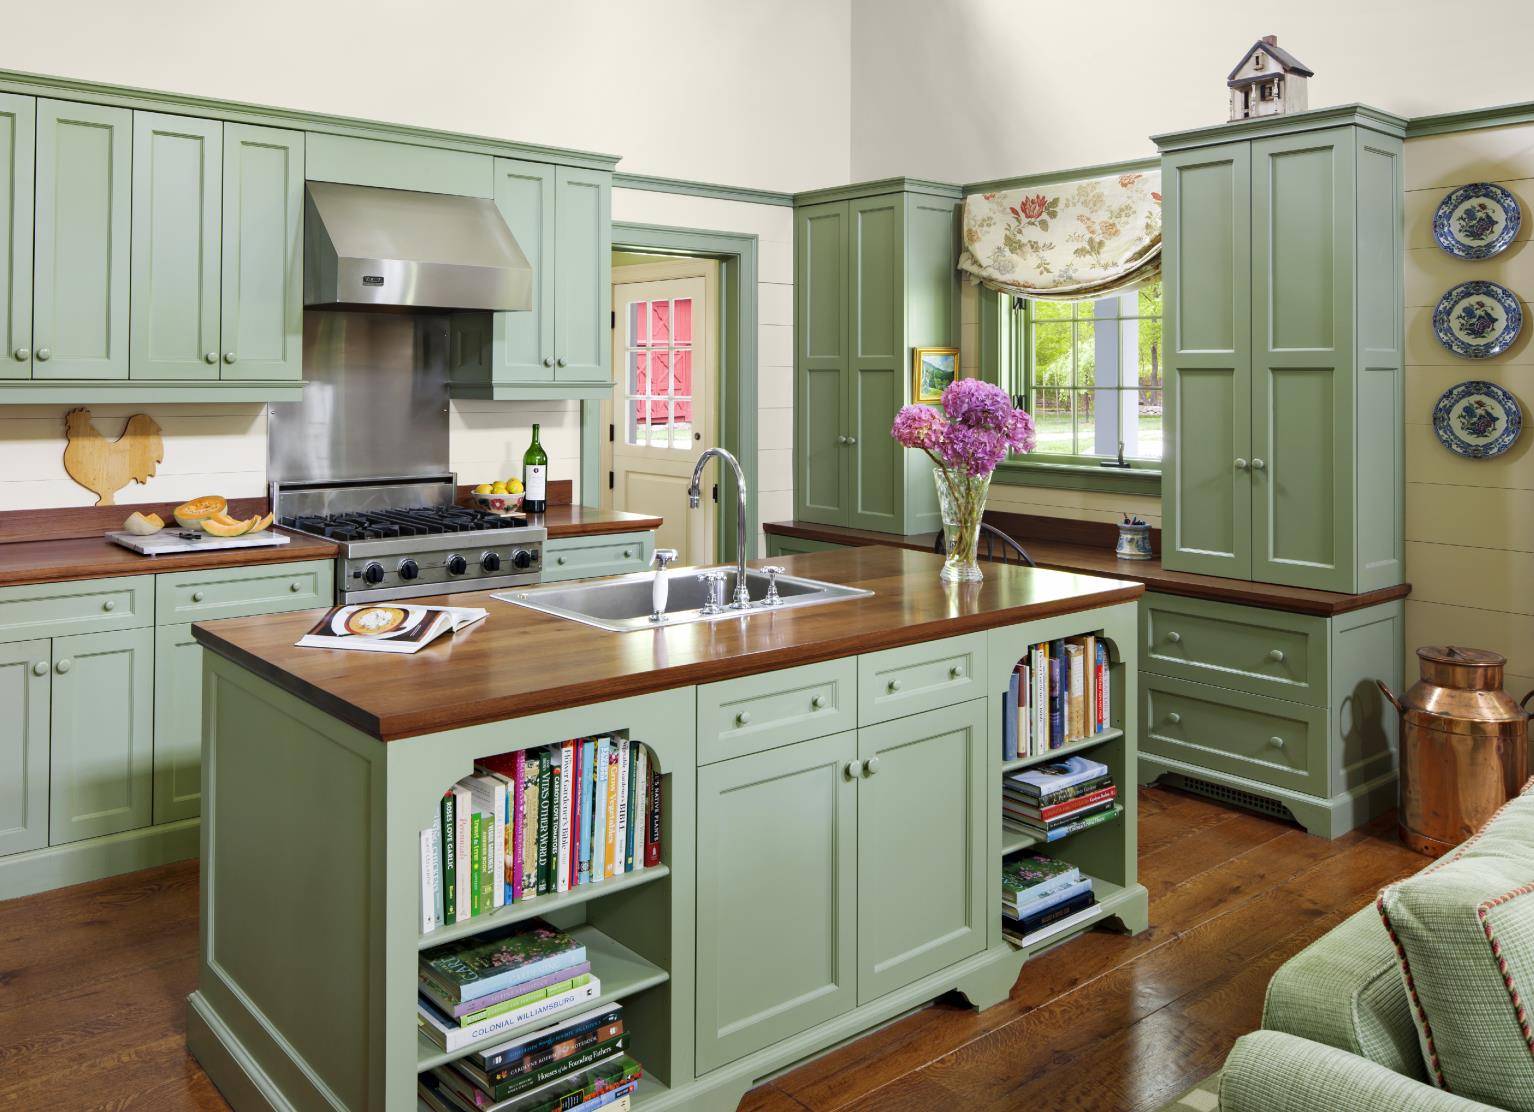 https://st.hzcdn.com/simgs/pictures/kitchens/farm-cottage-rosewood-custom-cabinetry-and-millwork-img~e6c1aa83015c7601_14-0555-1-ee0e720.jpg